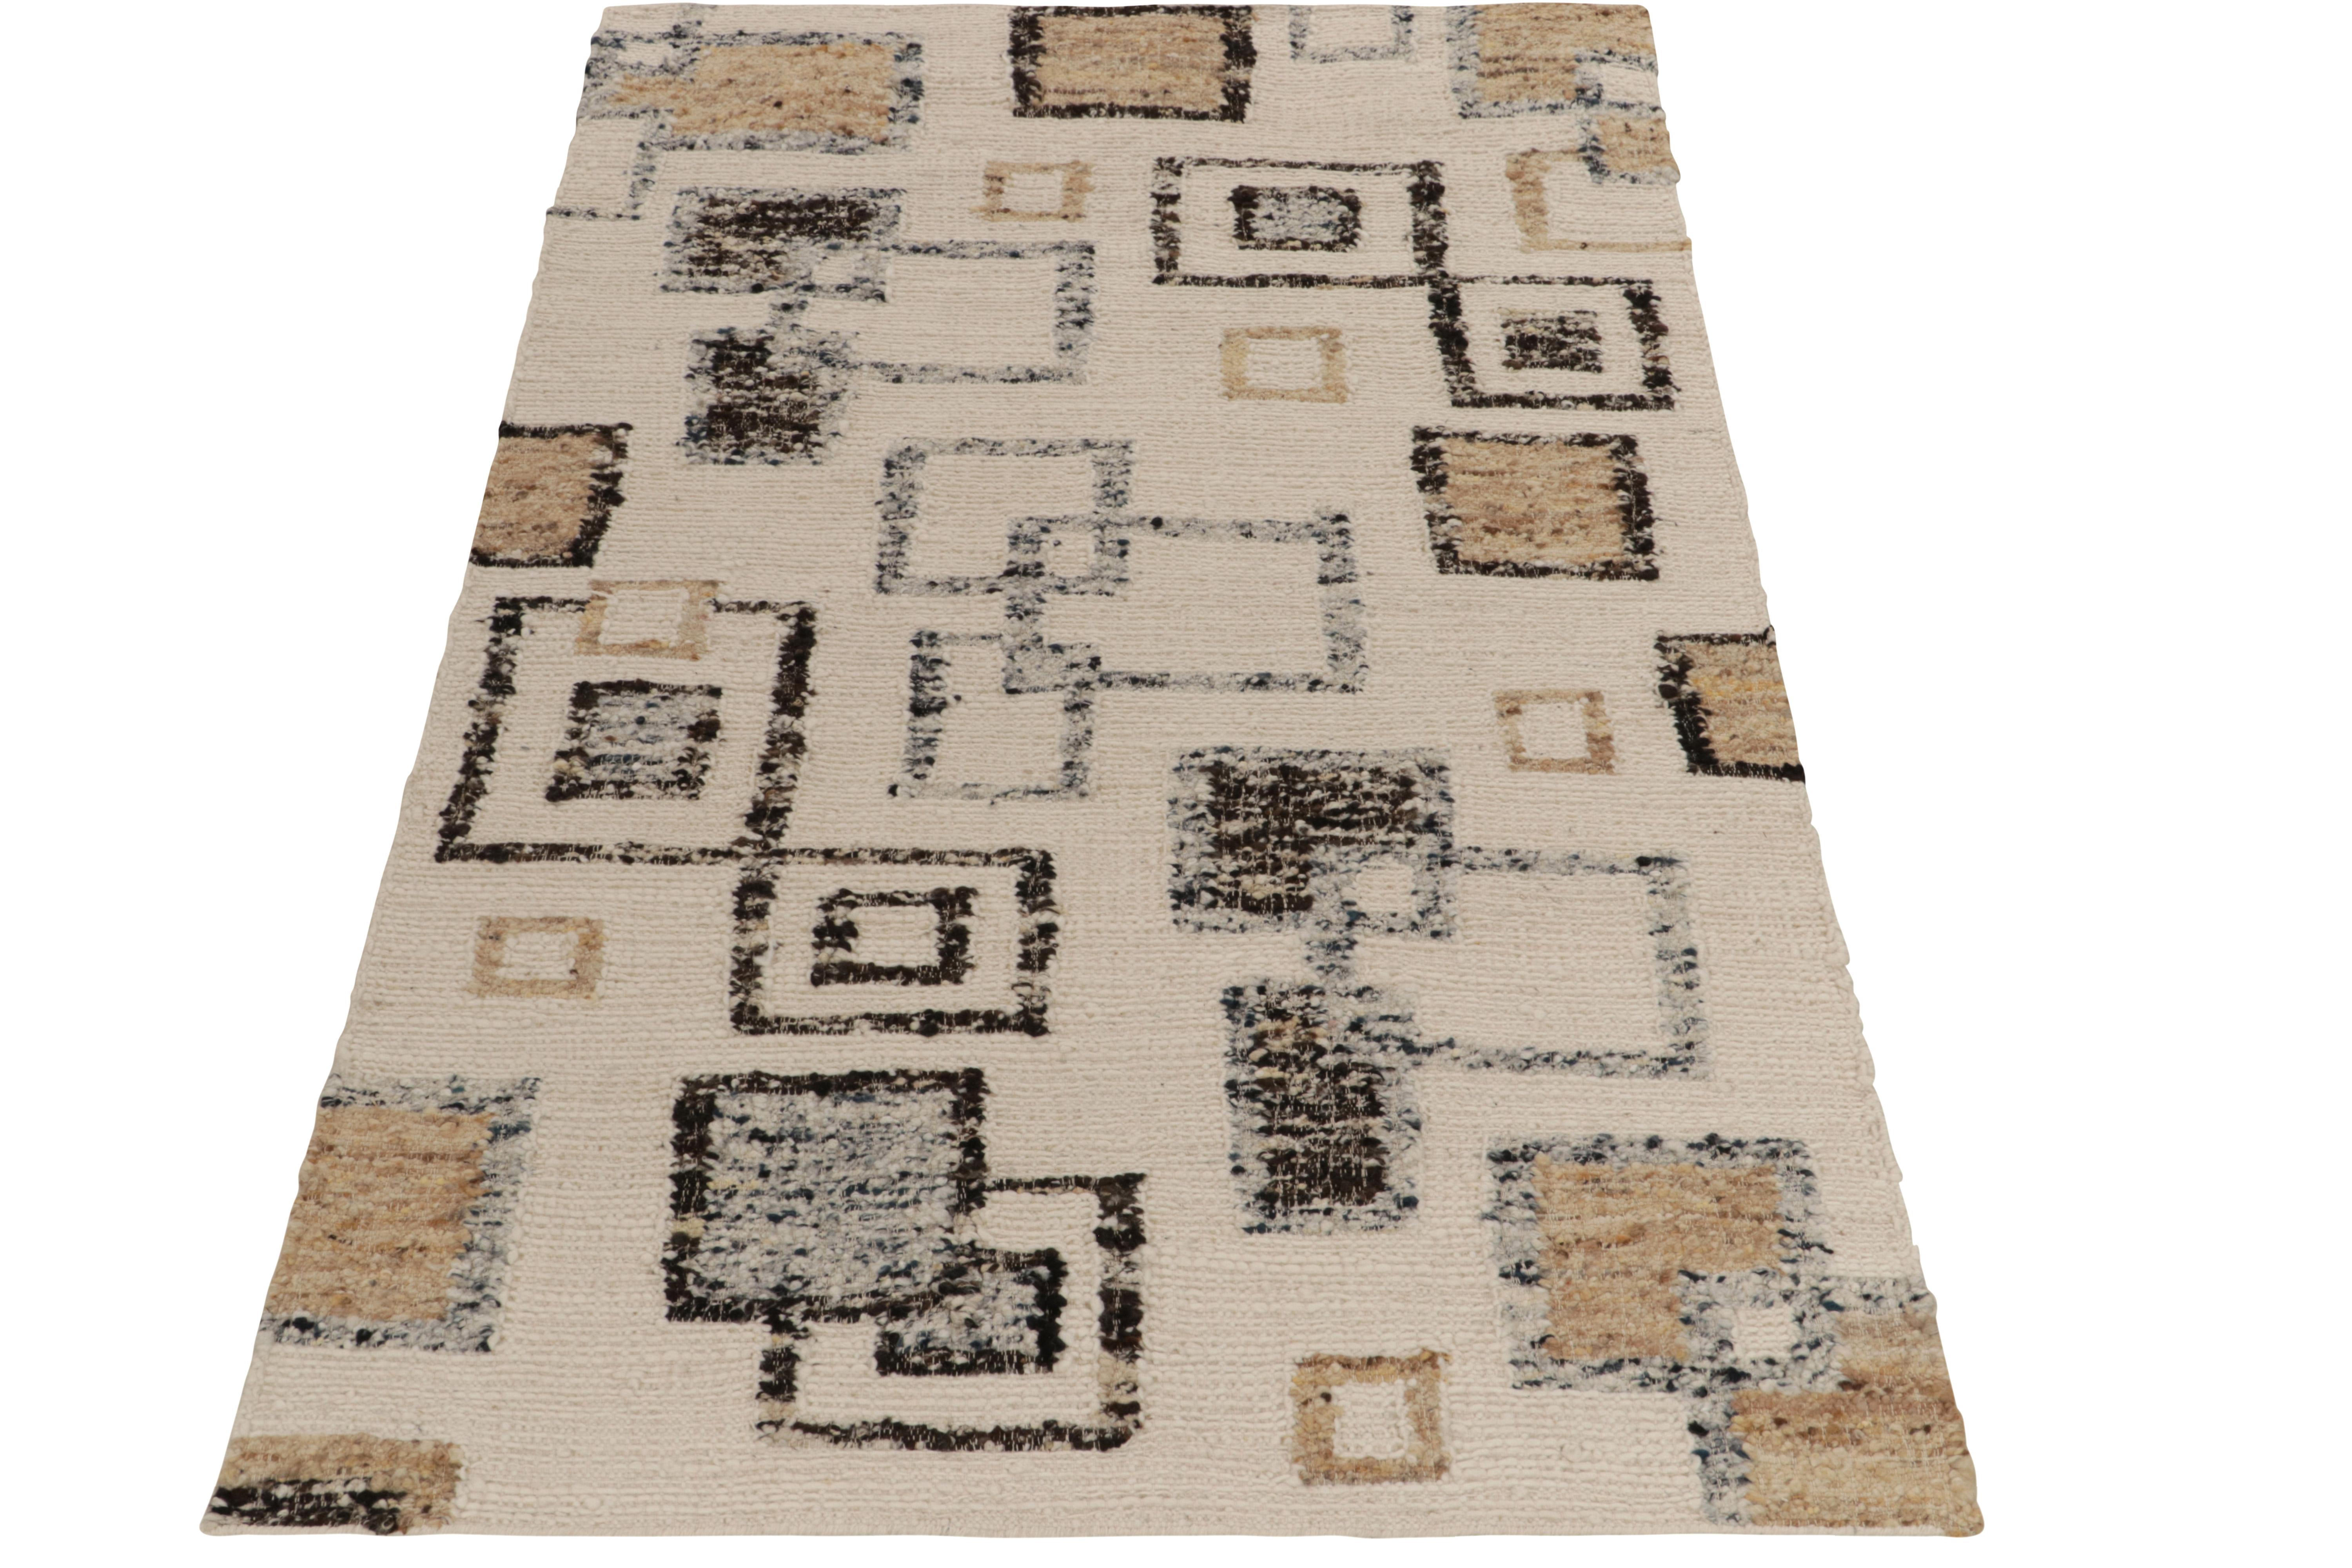 Rug & Kilim unveils its innovation in style & technique with this 5x8 flat weave rug, boldly exploring Art Deco styles in unprecedented textures. The Kilim features a modern geometric pattern in crisp white, beige-brown, black & light